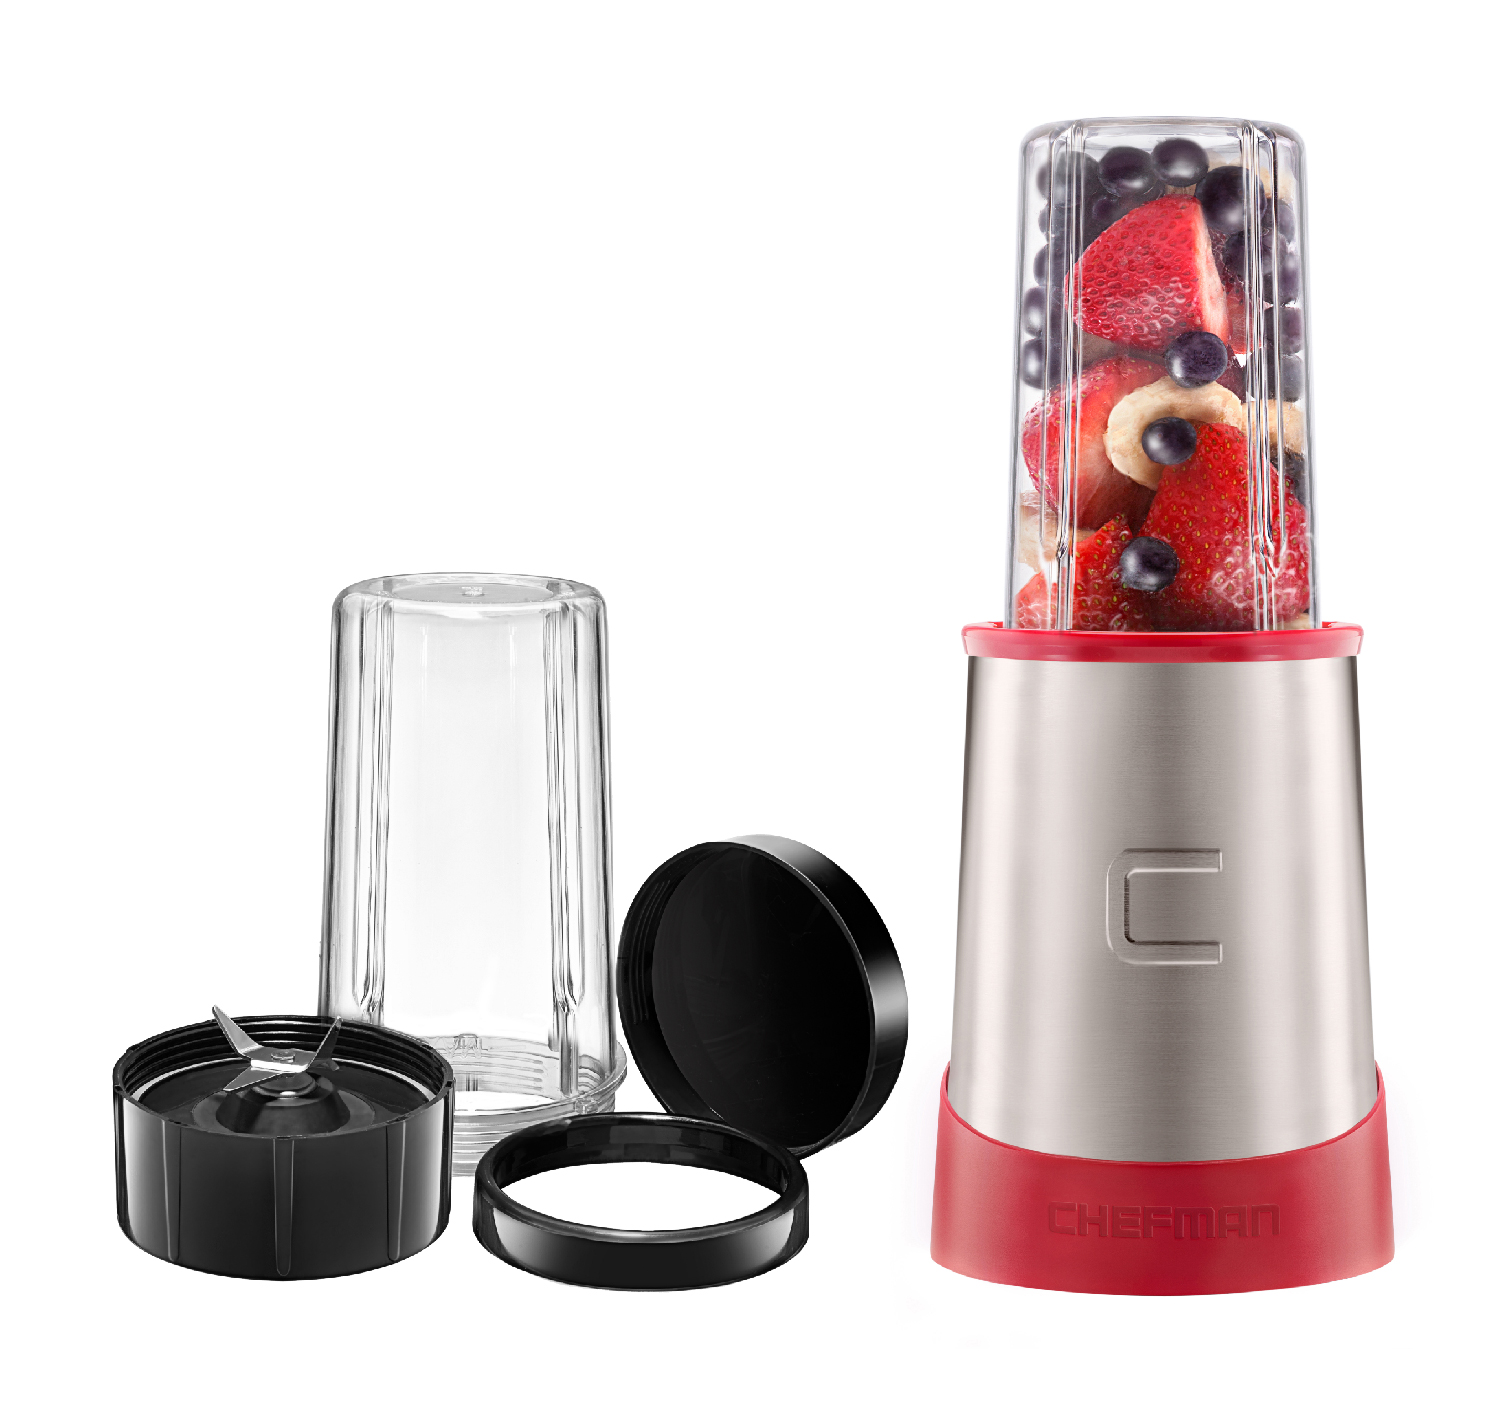 Chefman Ultimate Personal Smoothie Blender, Red - image 1 of 7